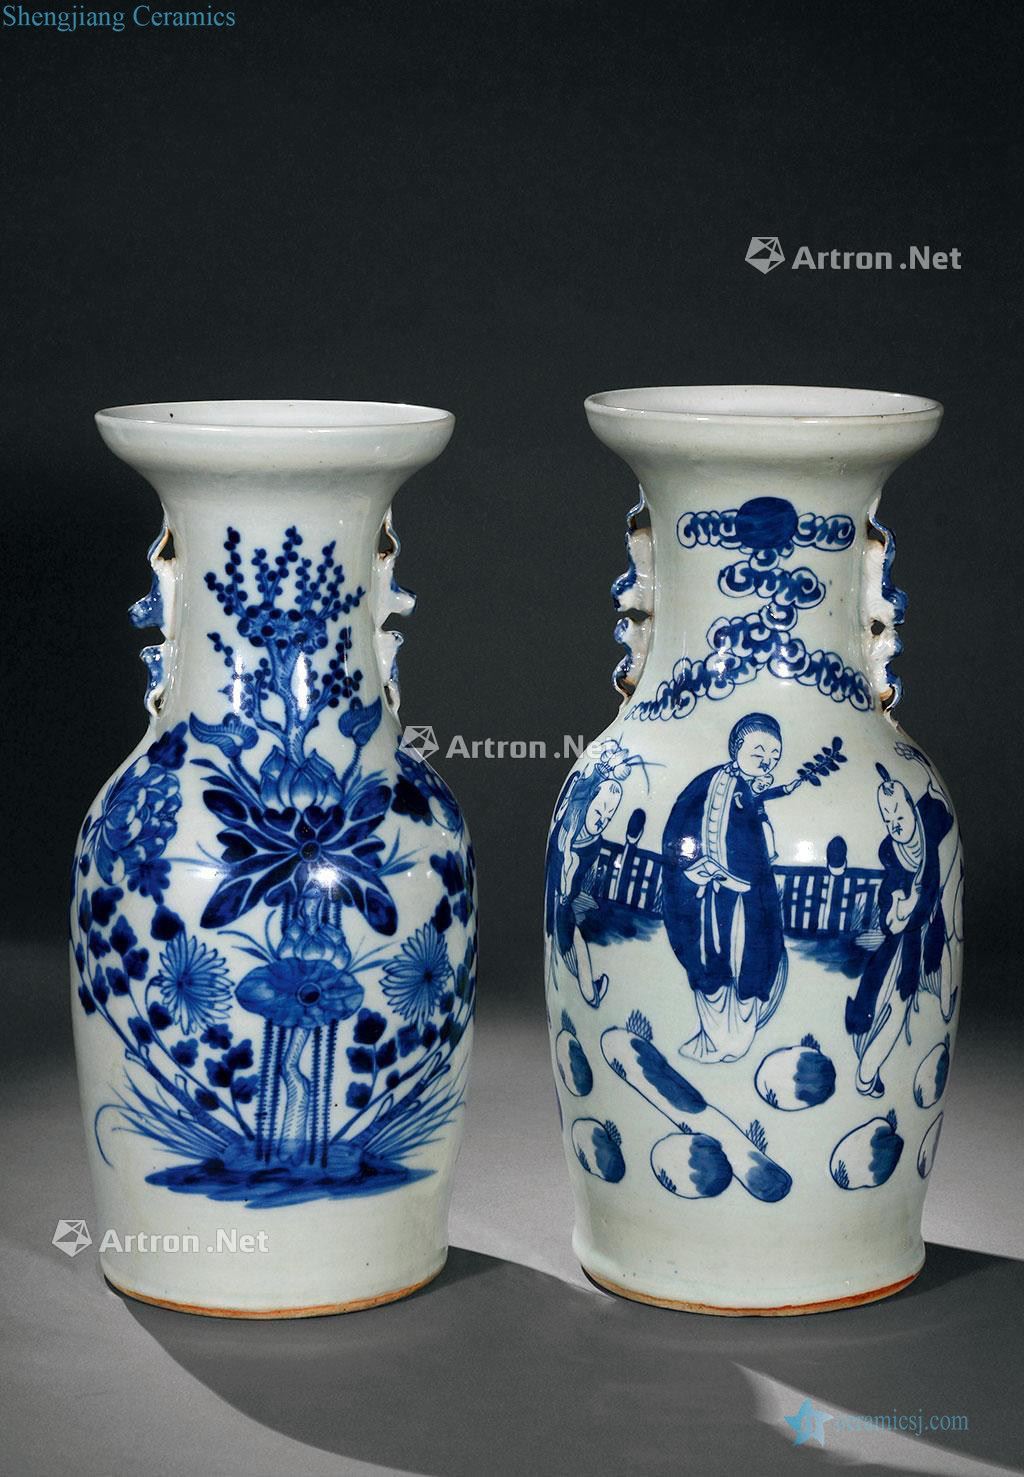 Qing flower character vase (two)